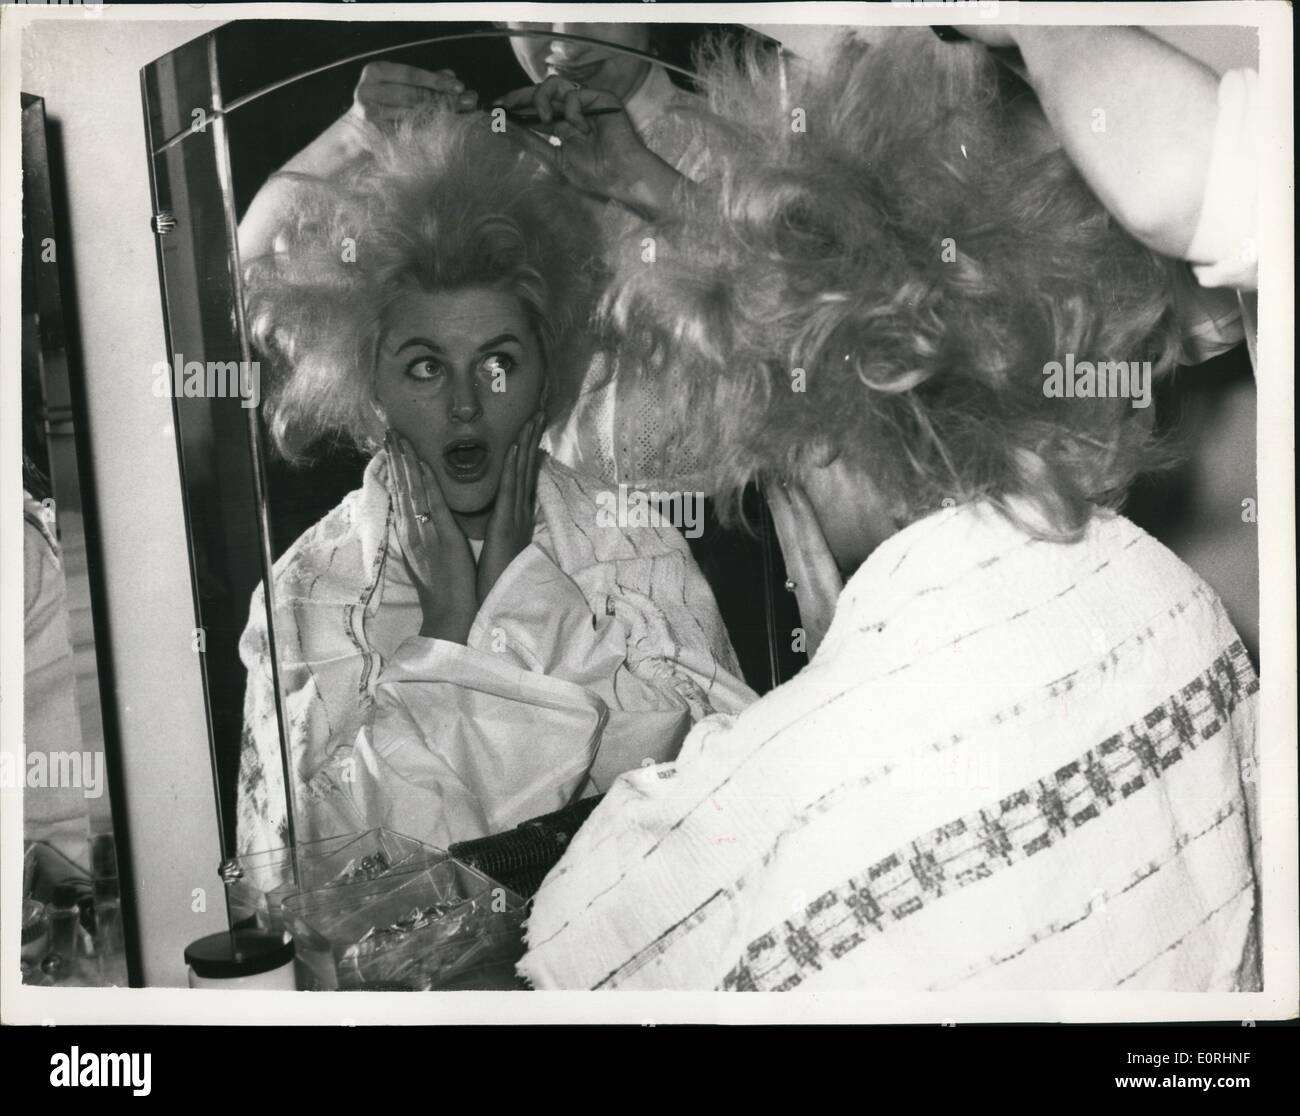 Nov. 11, 1959 - Hair-Do For ''Miss Wold'' Competitions Miss Austria In The Mirror: Monday of he ''Miss World'' competitors received a final hair-do this afternoon - at the Old Bond Street Salon of Mr. Leonard Taylor. Photo shows Miss Austria (Helga Knodel) looks at herself in the mirror - as he hair was fixed this afternoon. Stock Photo